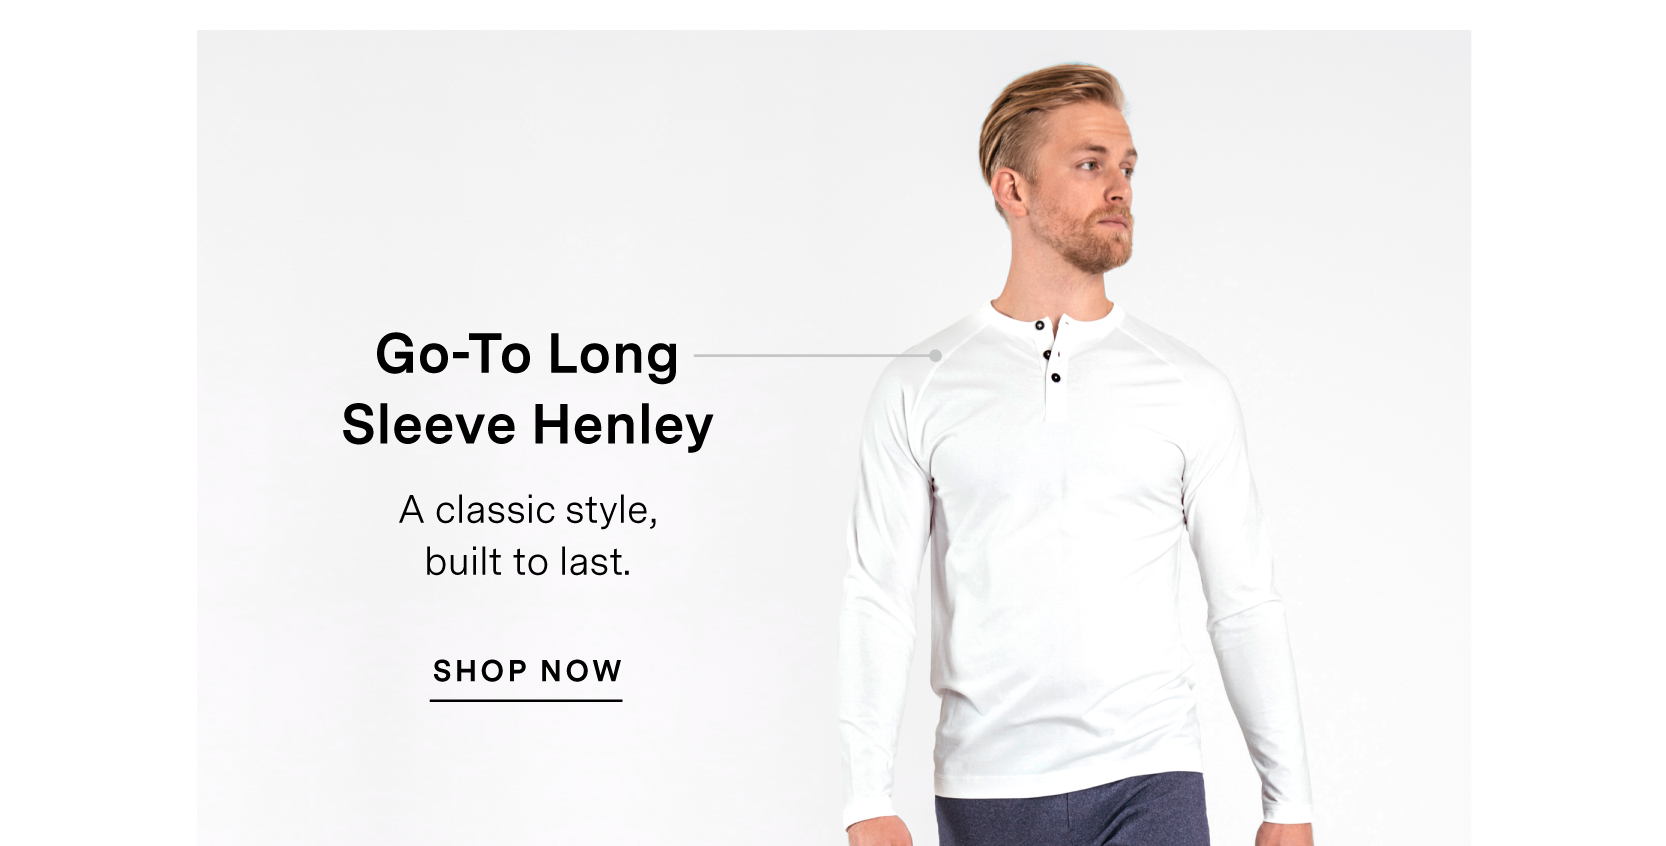 Go-To Long Sleeve Henley. SHOP NOW